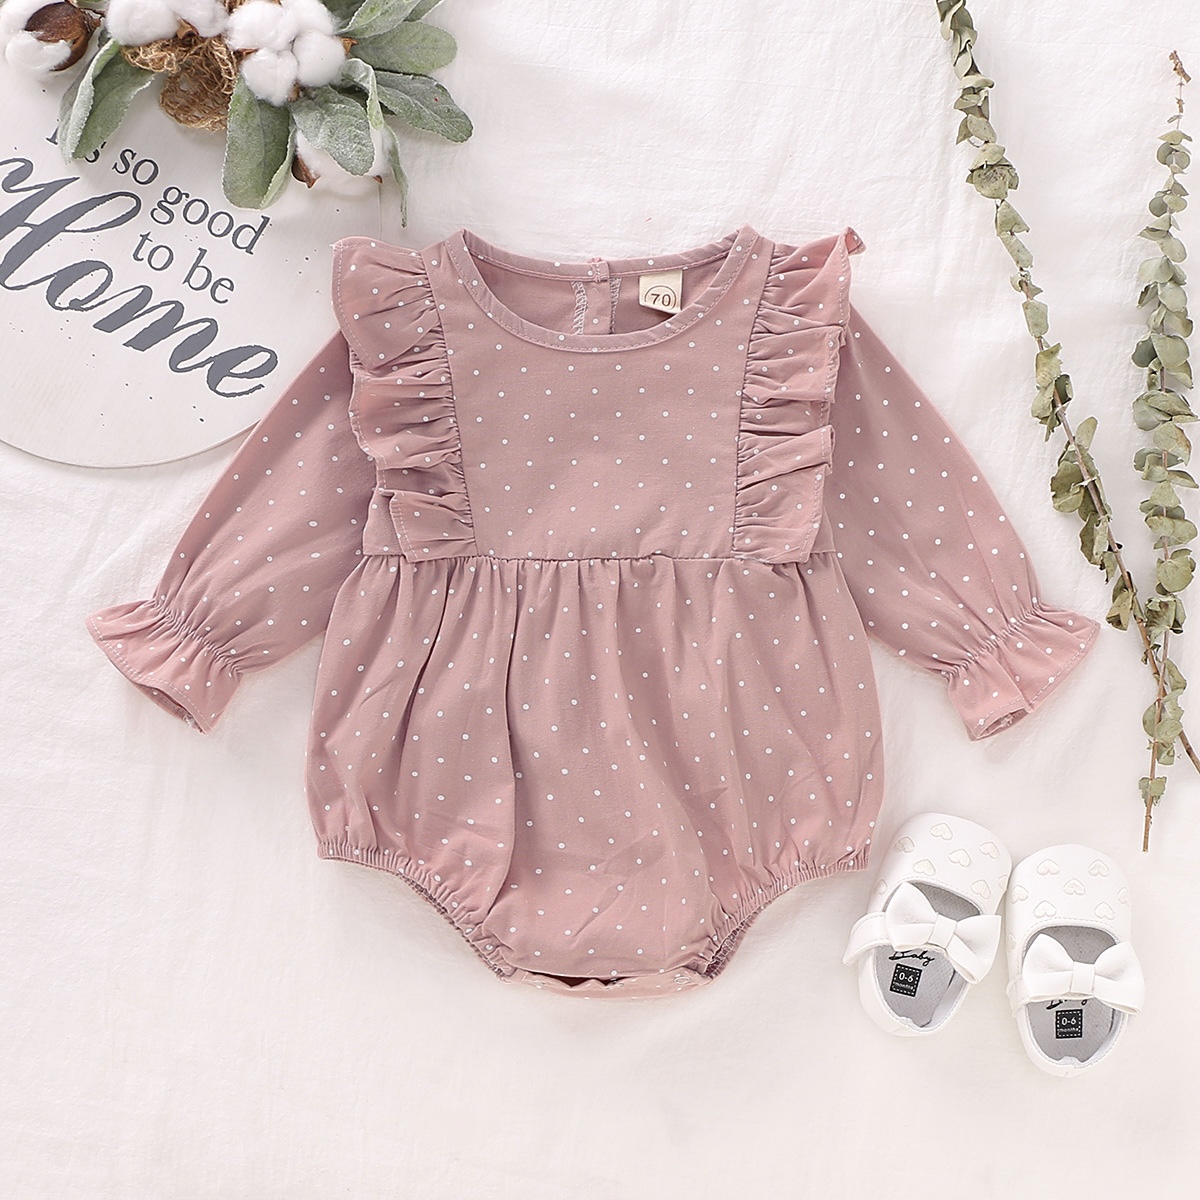 BODY ROMPER WITH RUFFLES AND DOTS - PINK WHITE - FULL SUIT - JUMPSUIT - GIRL - LS